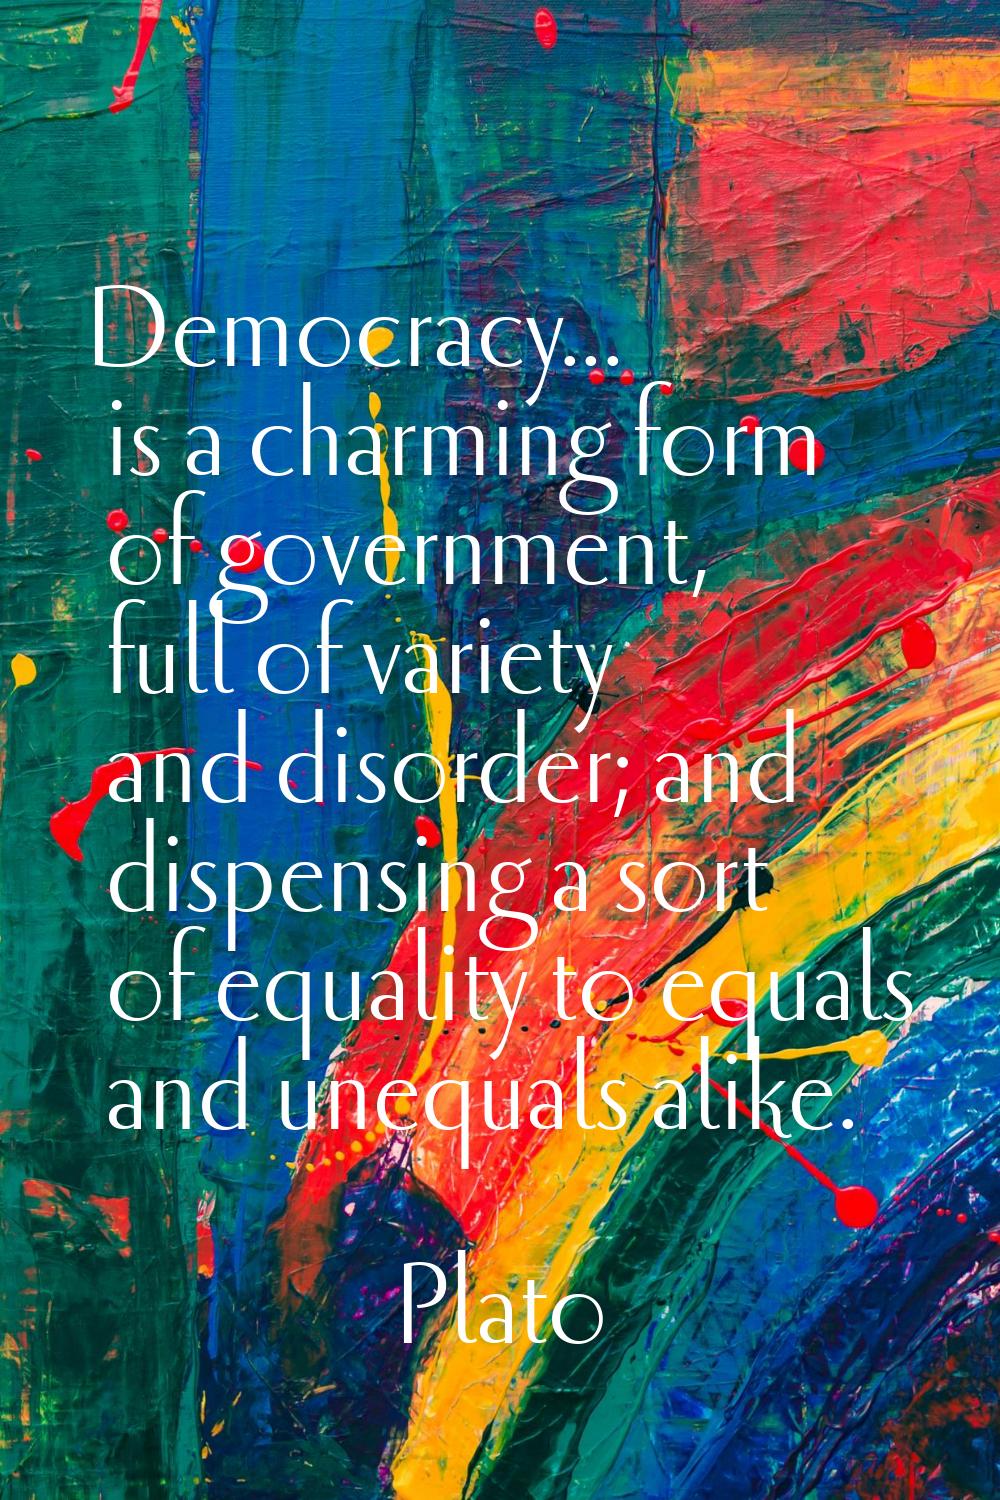 Democracy... is a charming form of government, full of variety and disorder; and dispensing a sort 